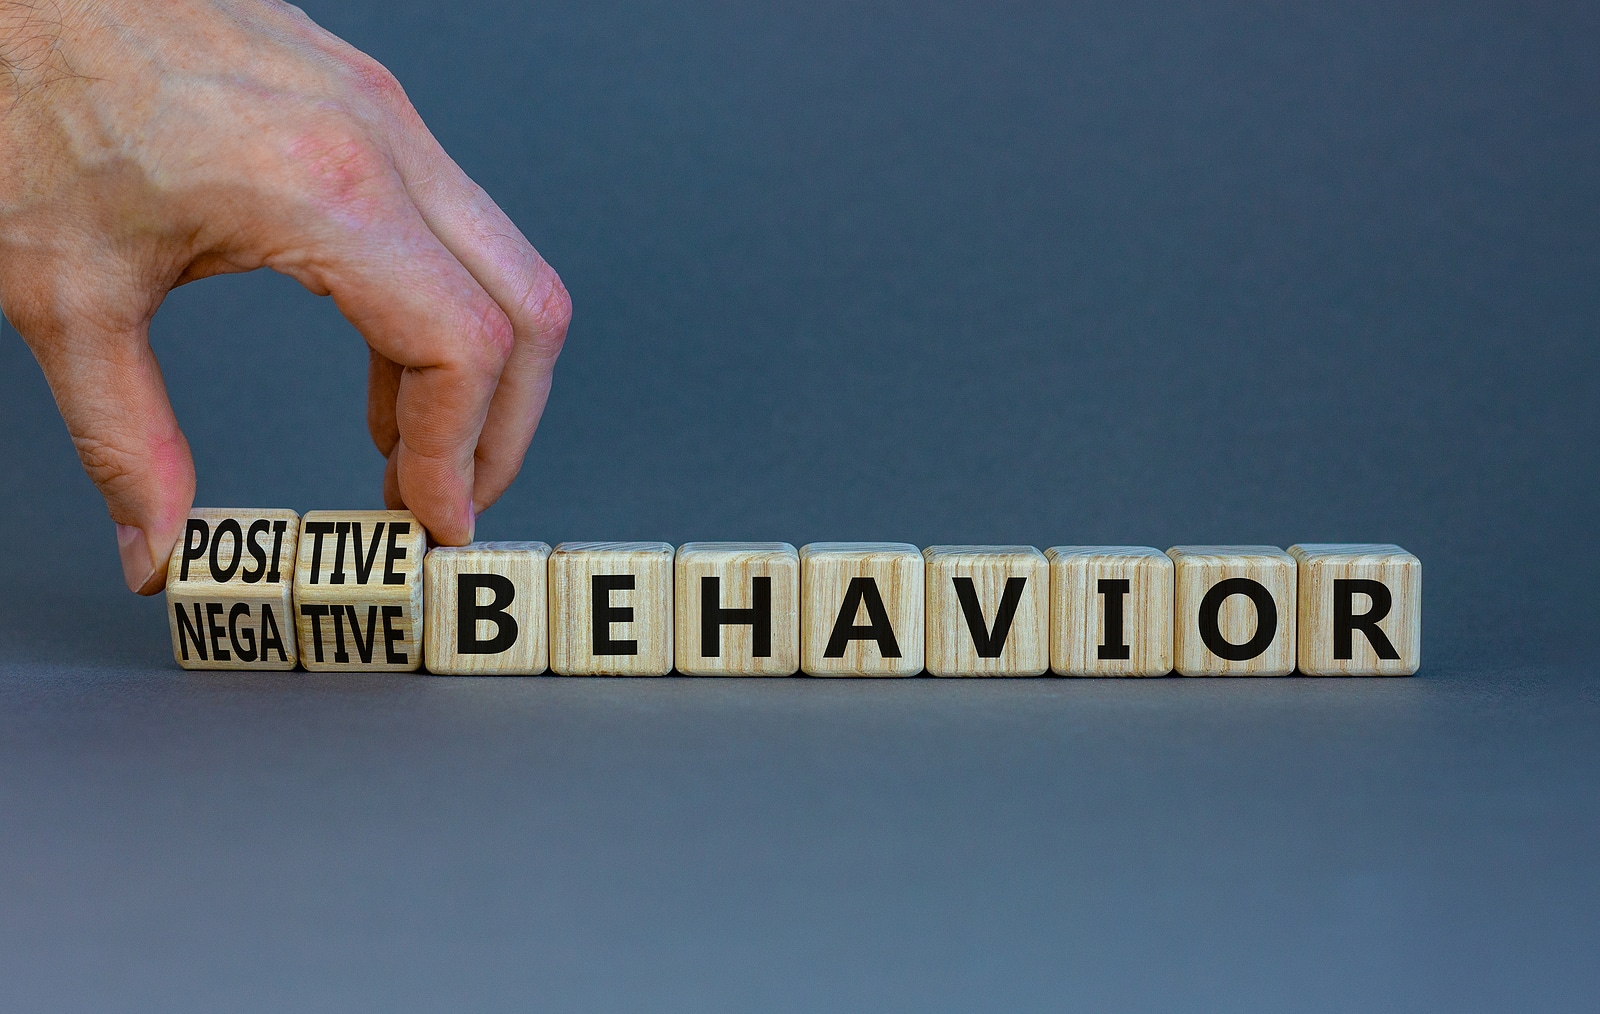 Top 5 positive behavior strategies for parents and caregivers